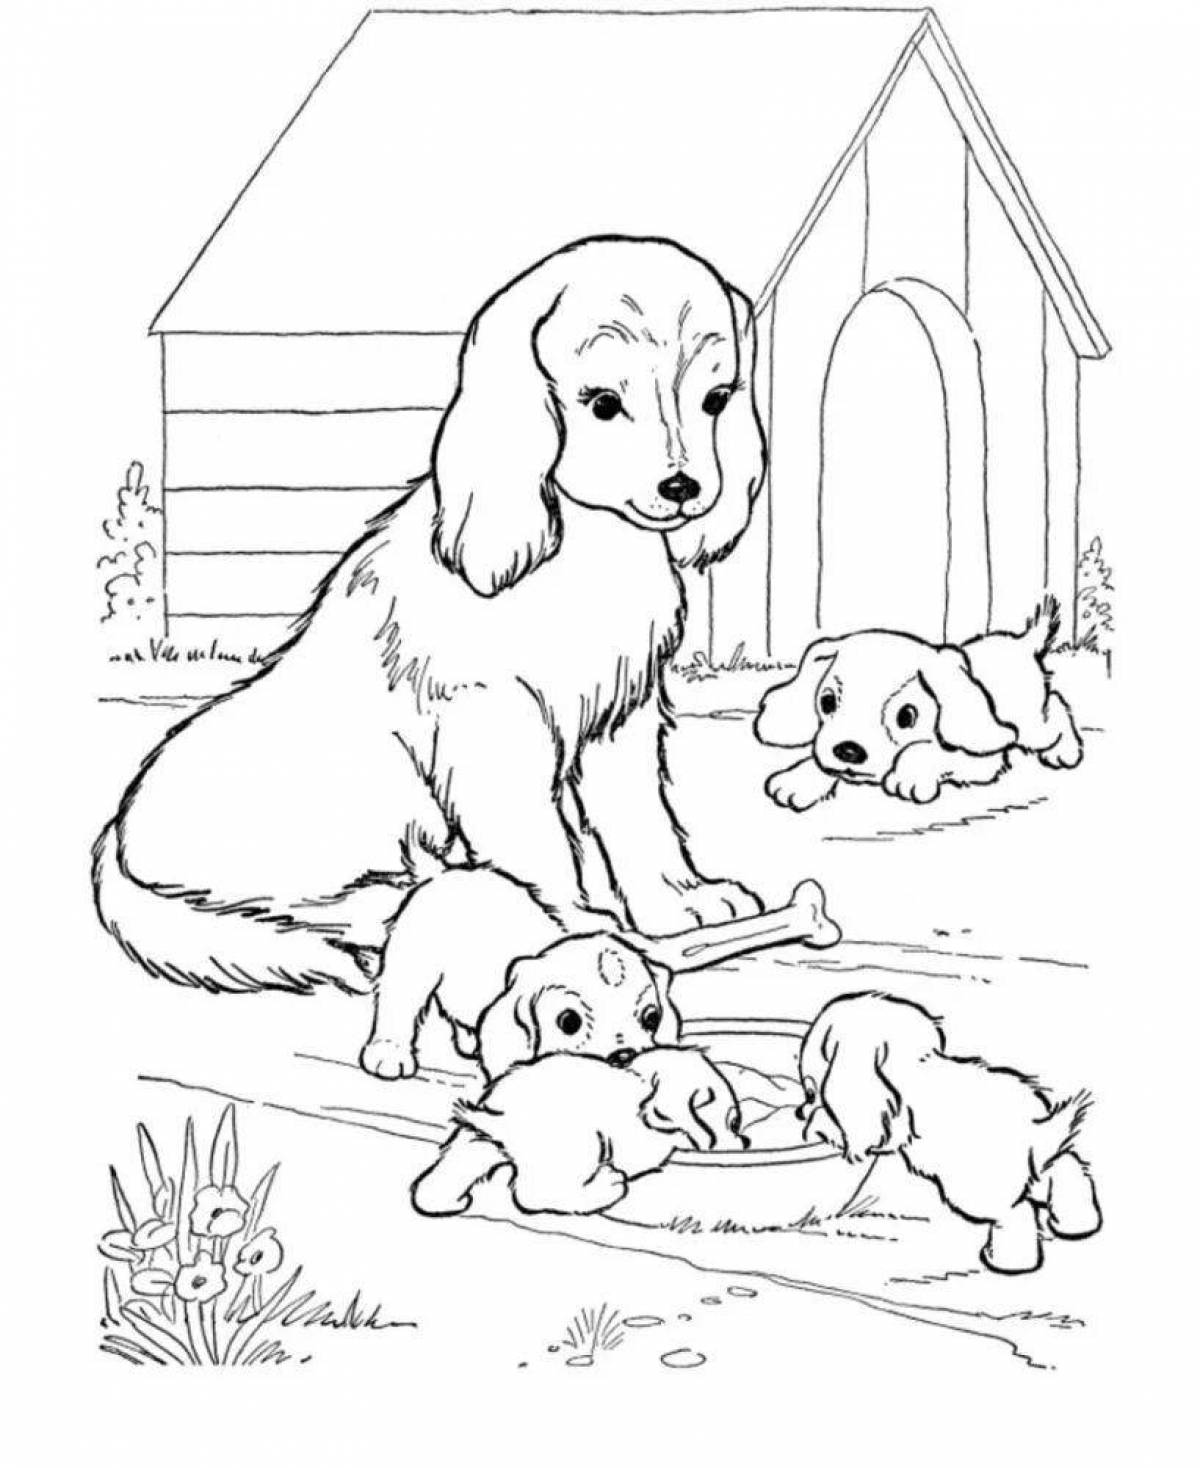 Exciting dog family coloring book